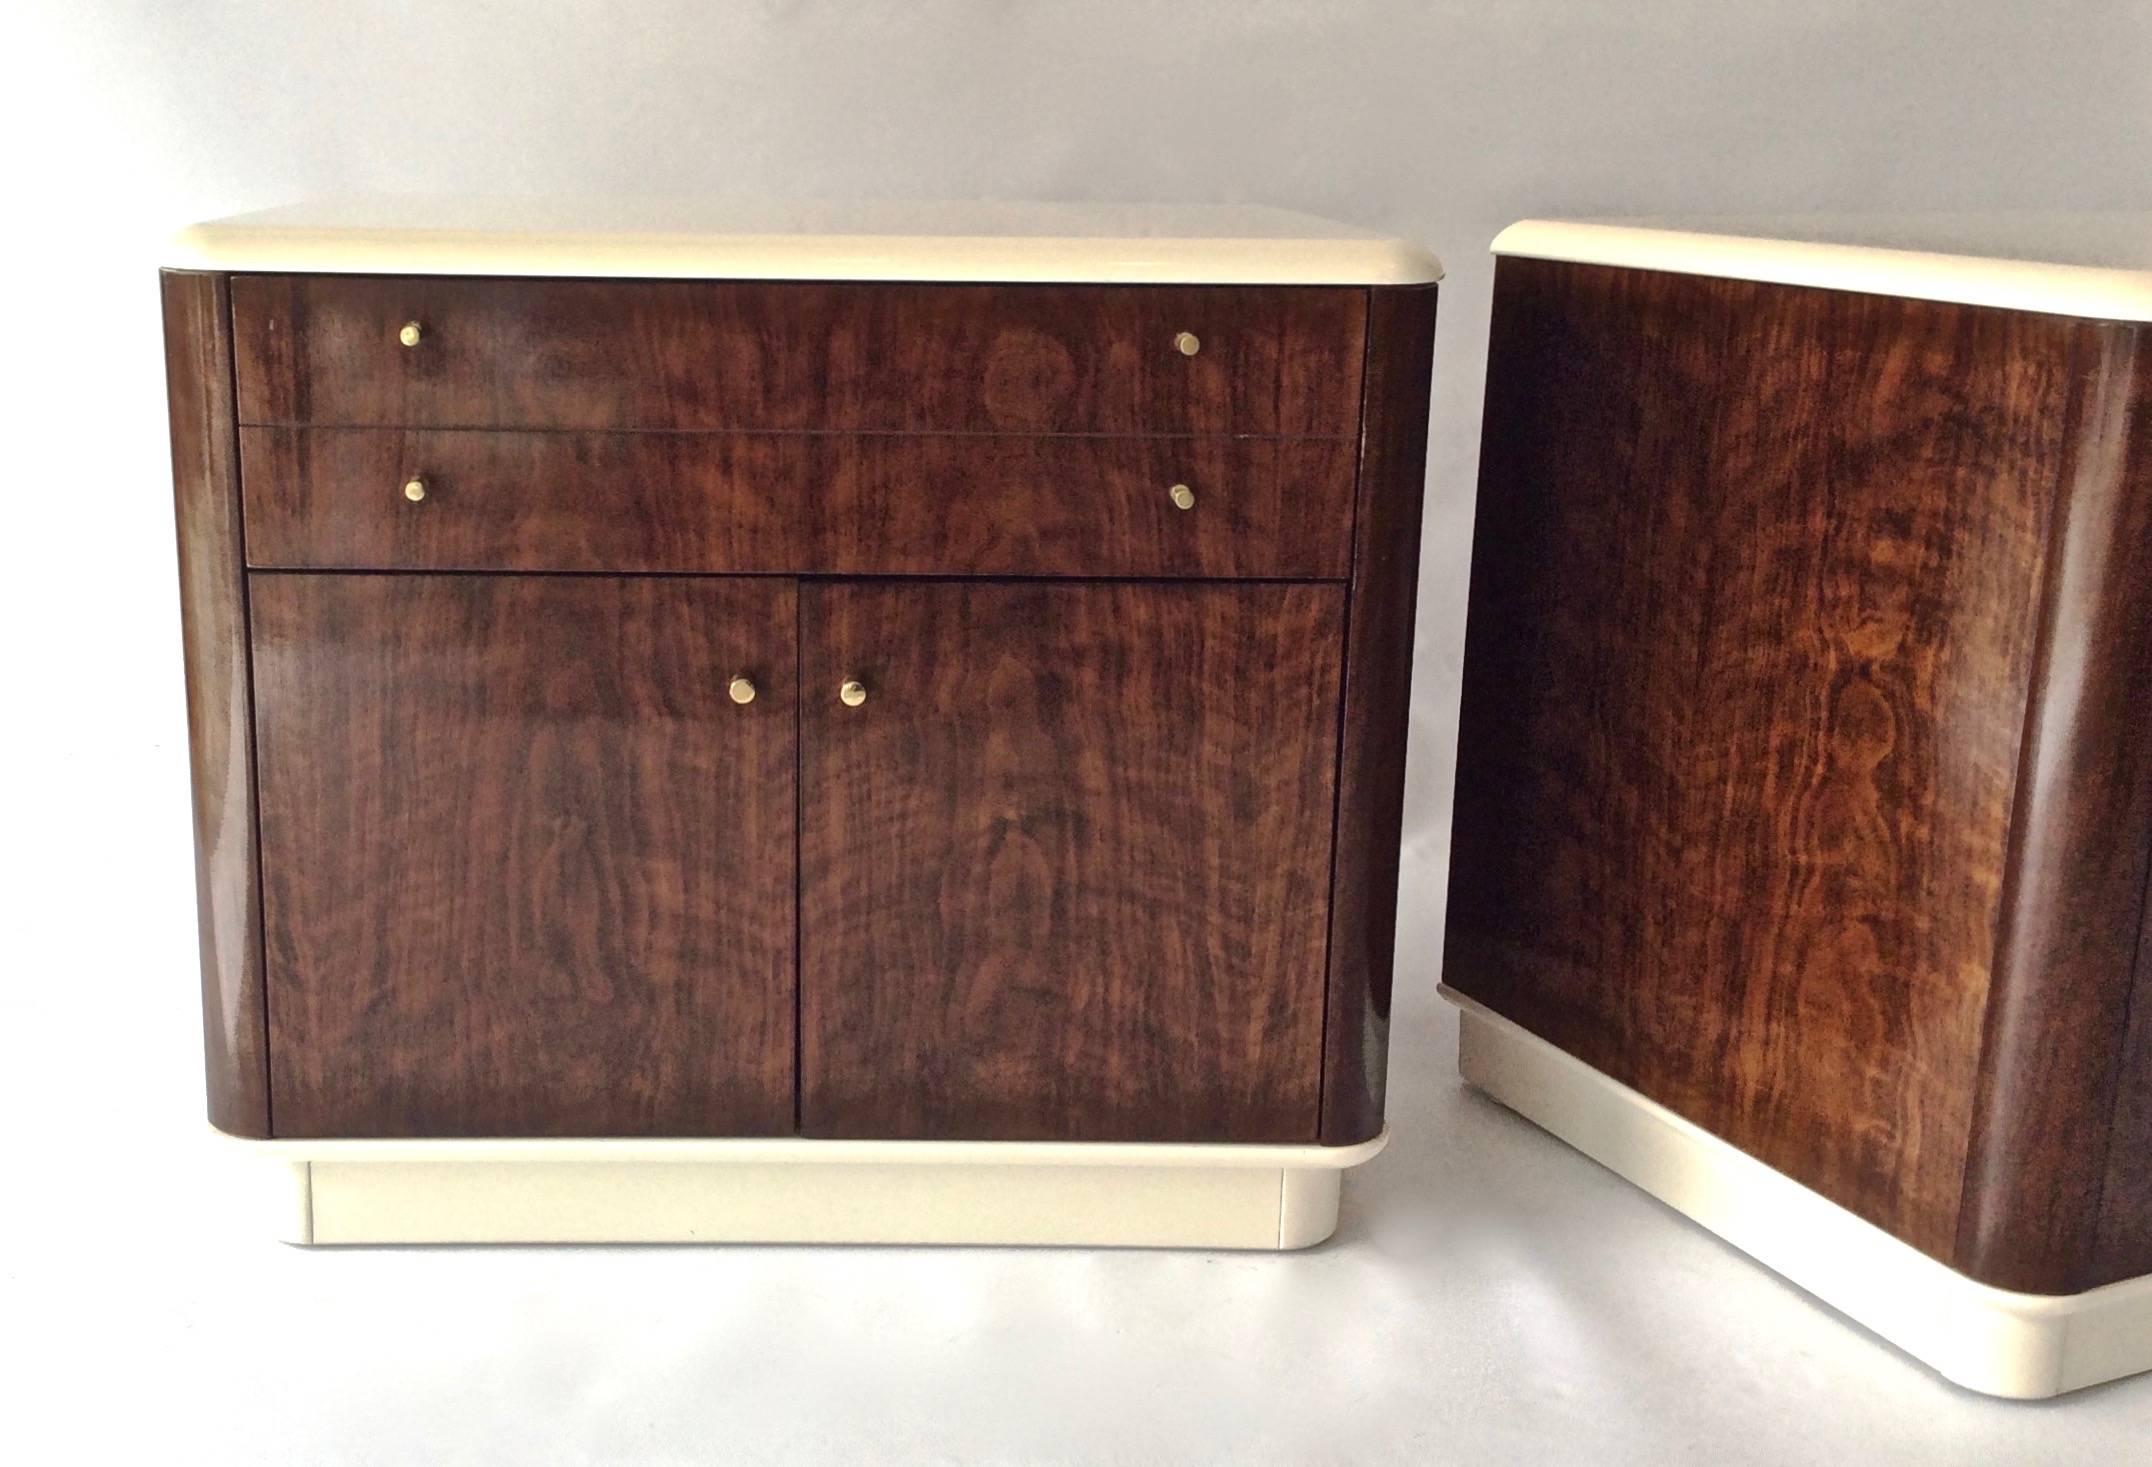 Newly lacquered top and bottom sections enhance the beautiful wood grain of these Drexel profile night or end tables.
Original brass hardware on functioning top drawer and cabinet doors. 

Additional measurement information
Drawer inside